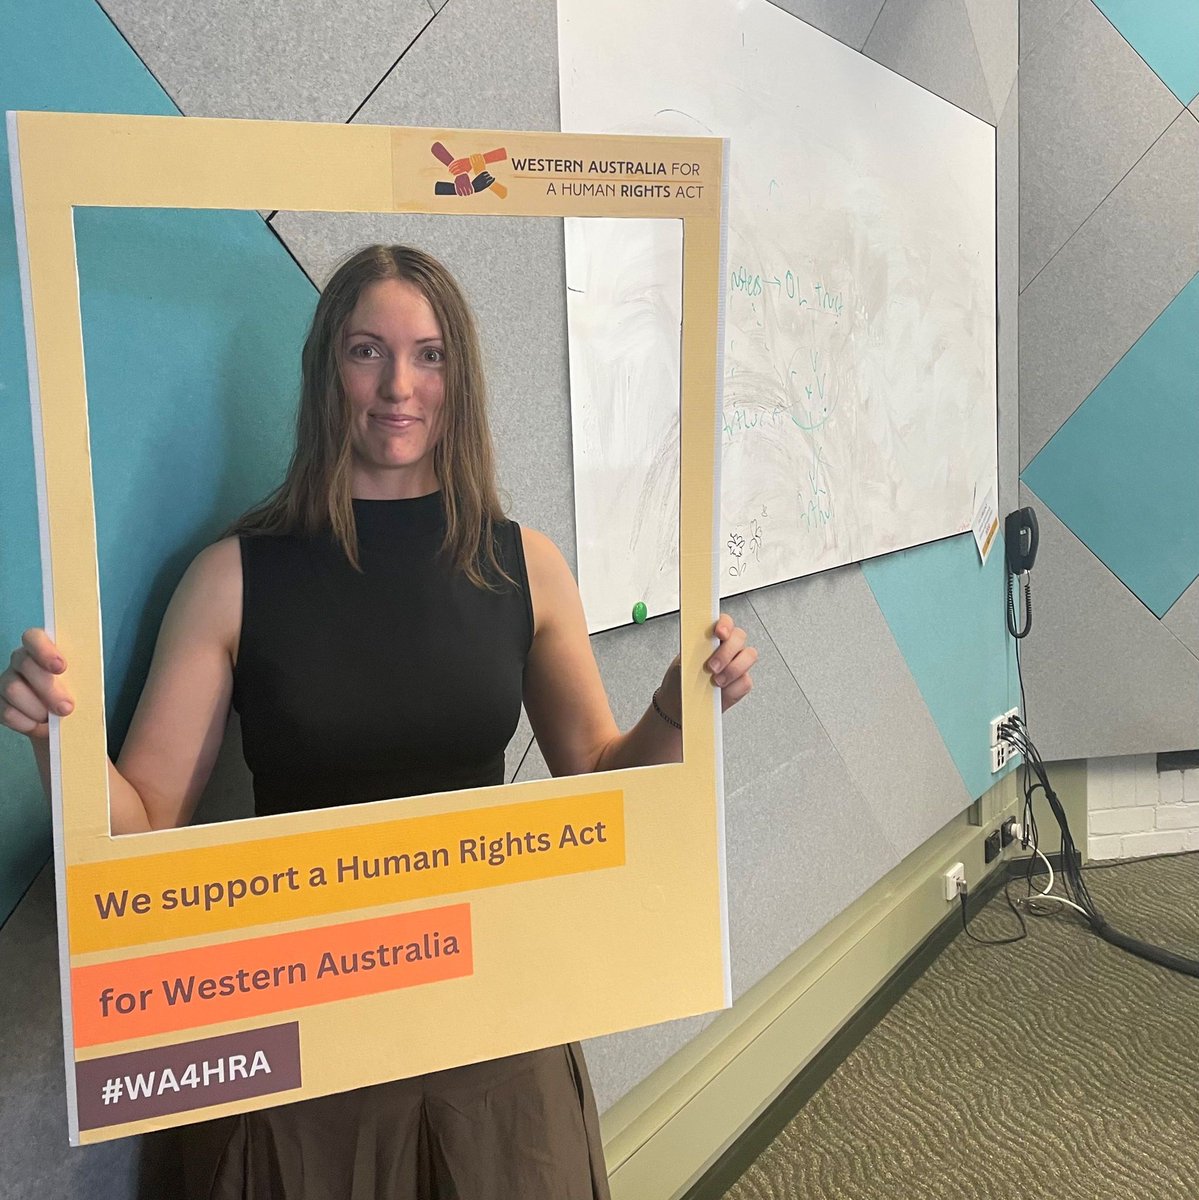 Clare Lagan, PhD Candidate at University of Western Australia Law School, supports the call for a Human Rights Act for Western Australia. #wa4hra